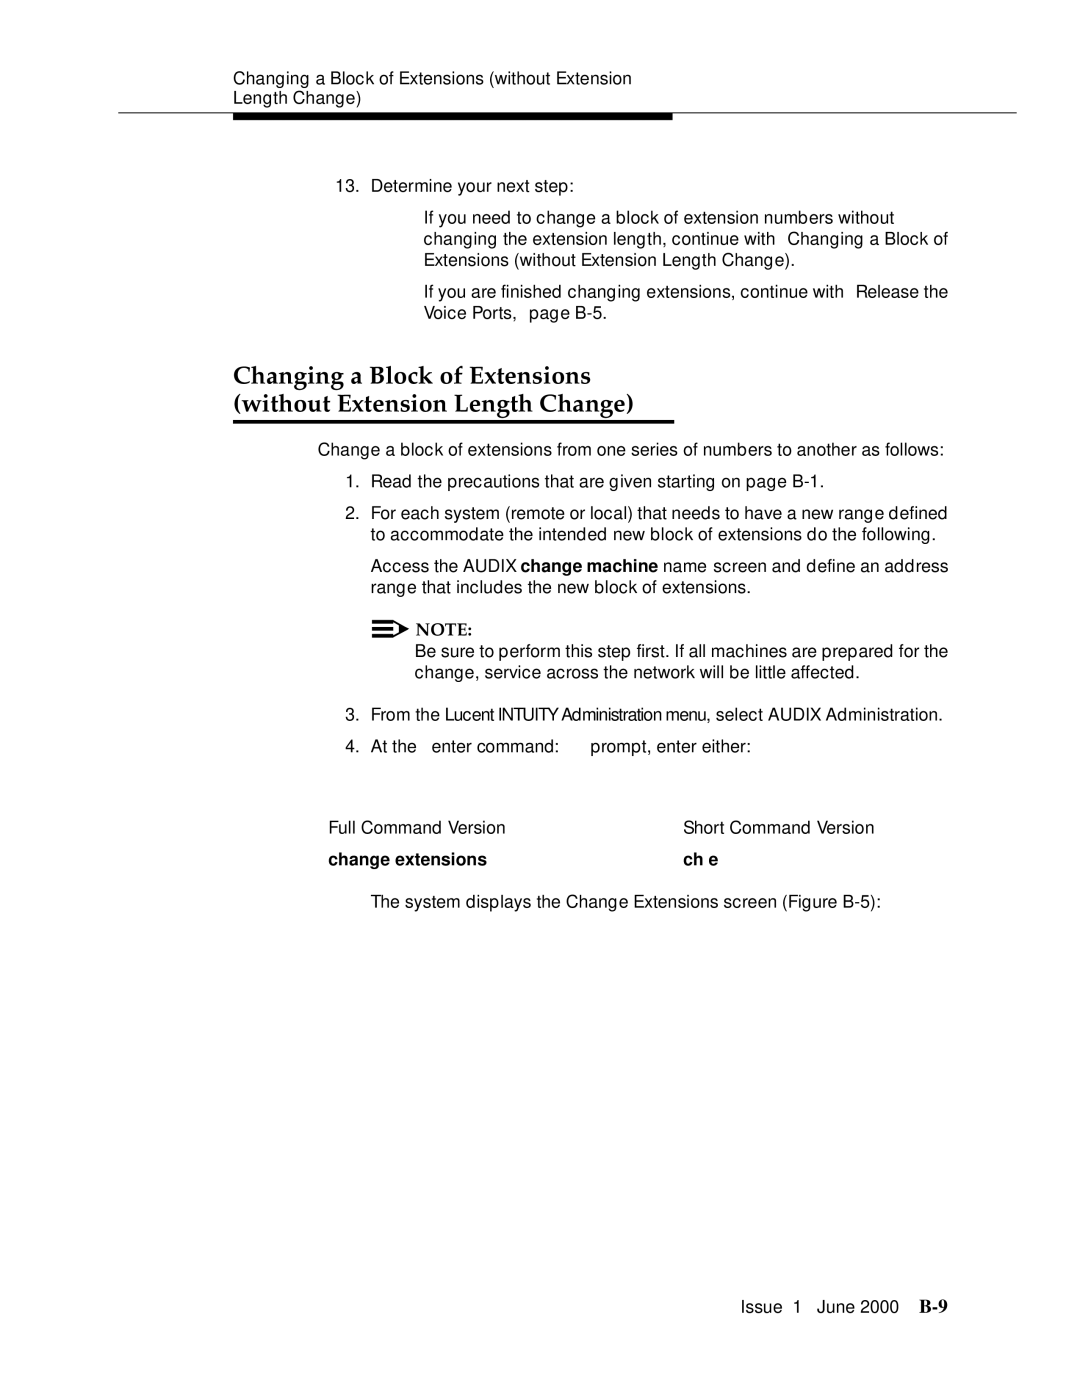 Lucent Technologies Release 3 manual Change extensions Ch e 